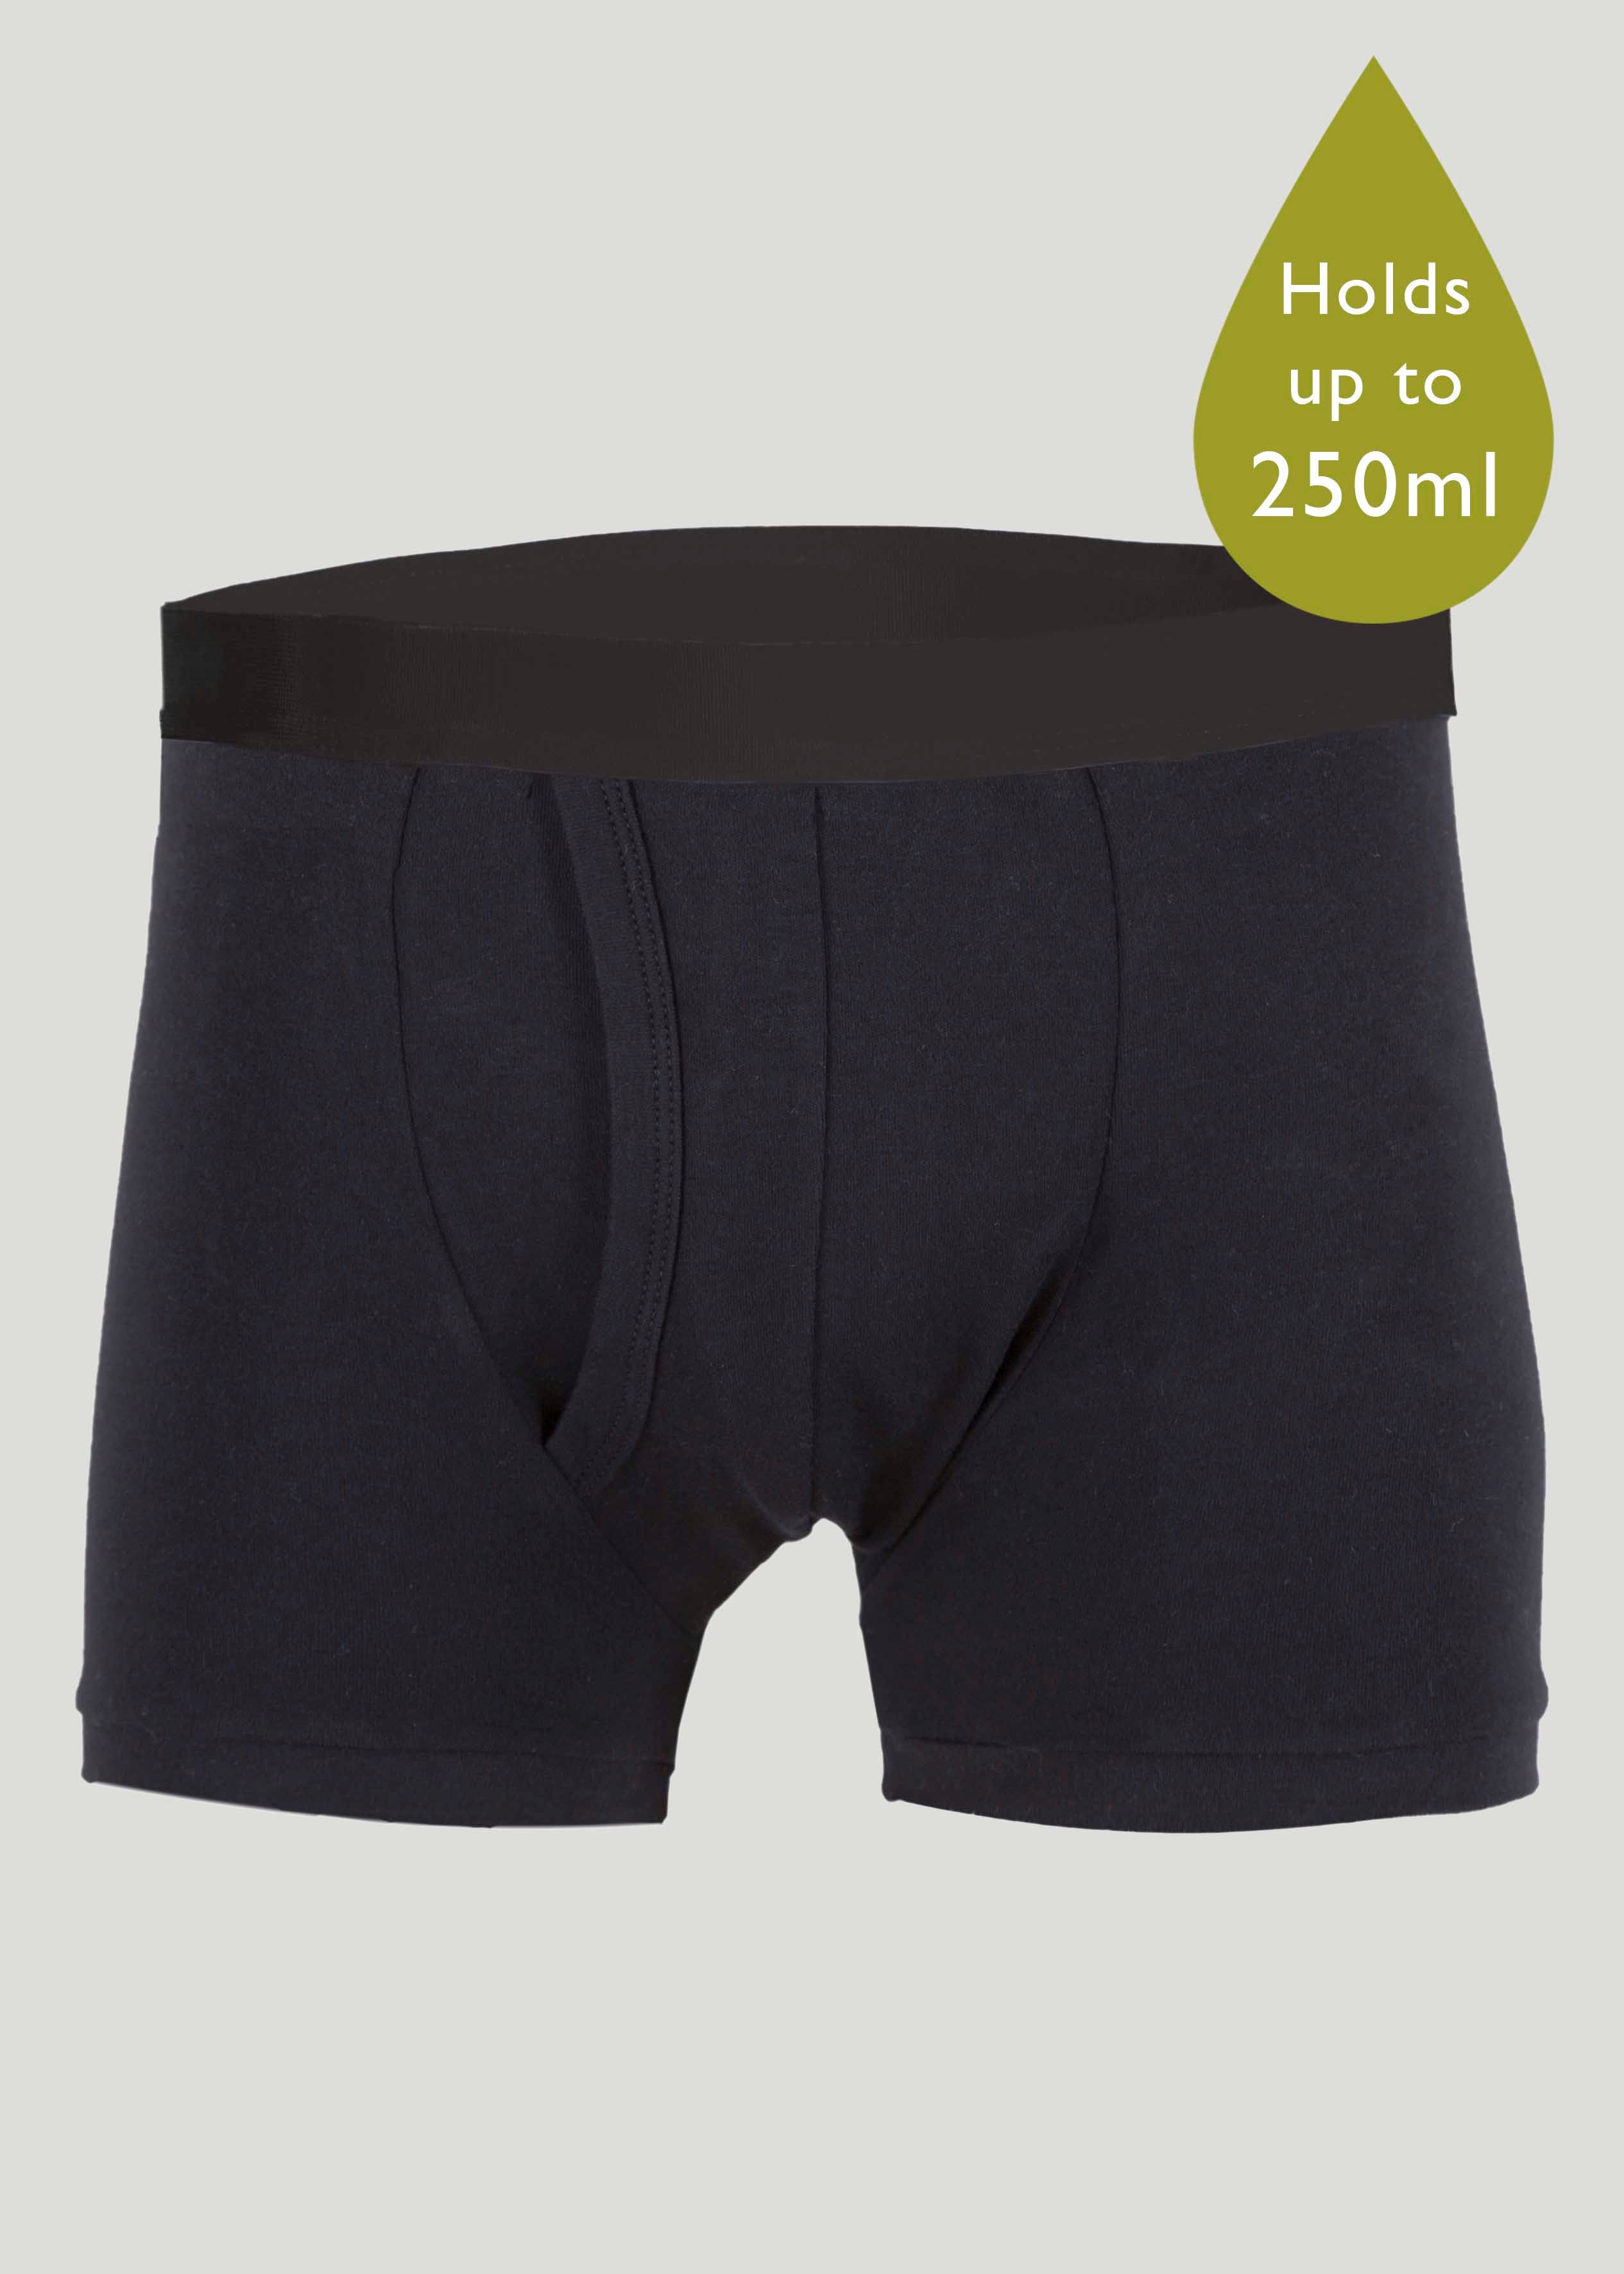 Reusable Incontinence Underwear For Men And Women Comfortable